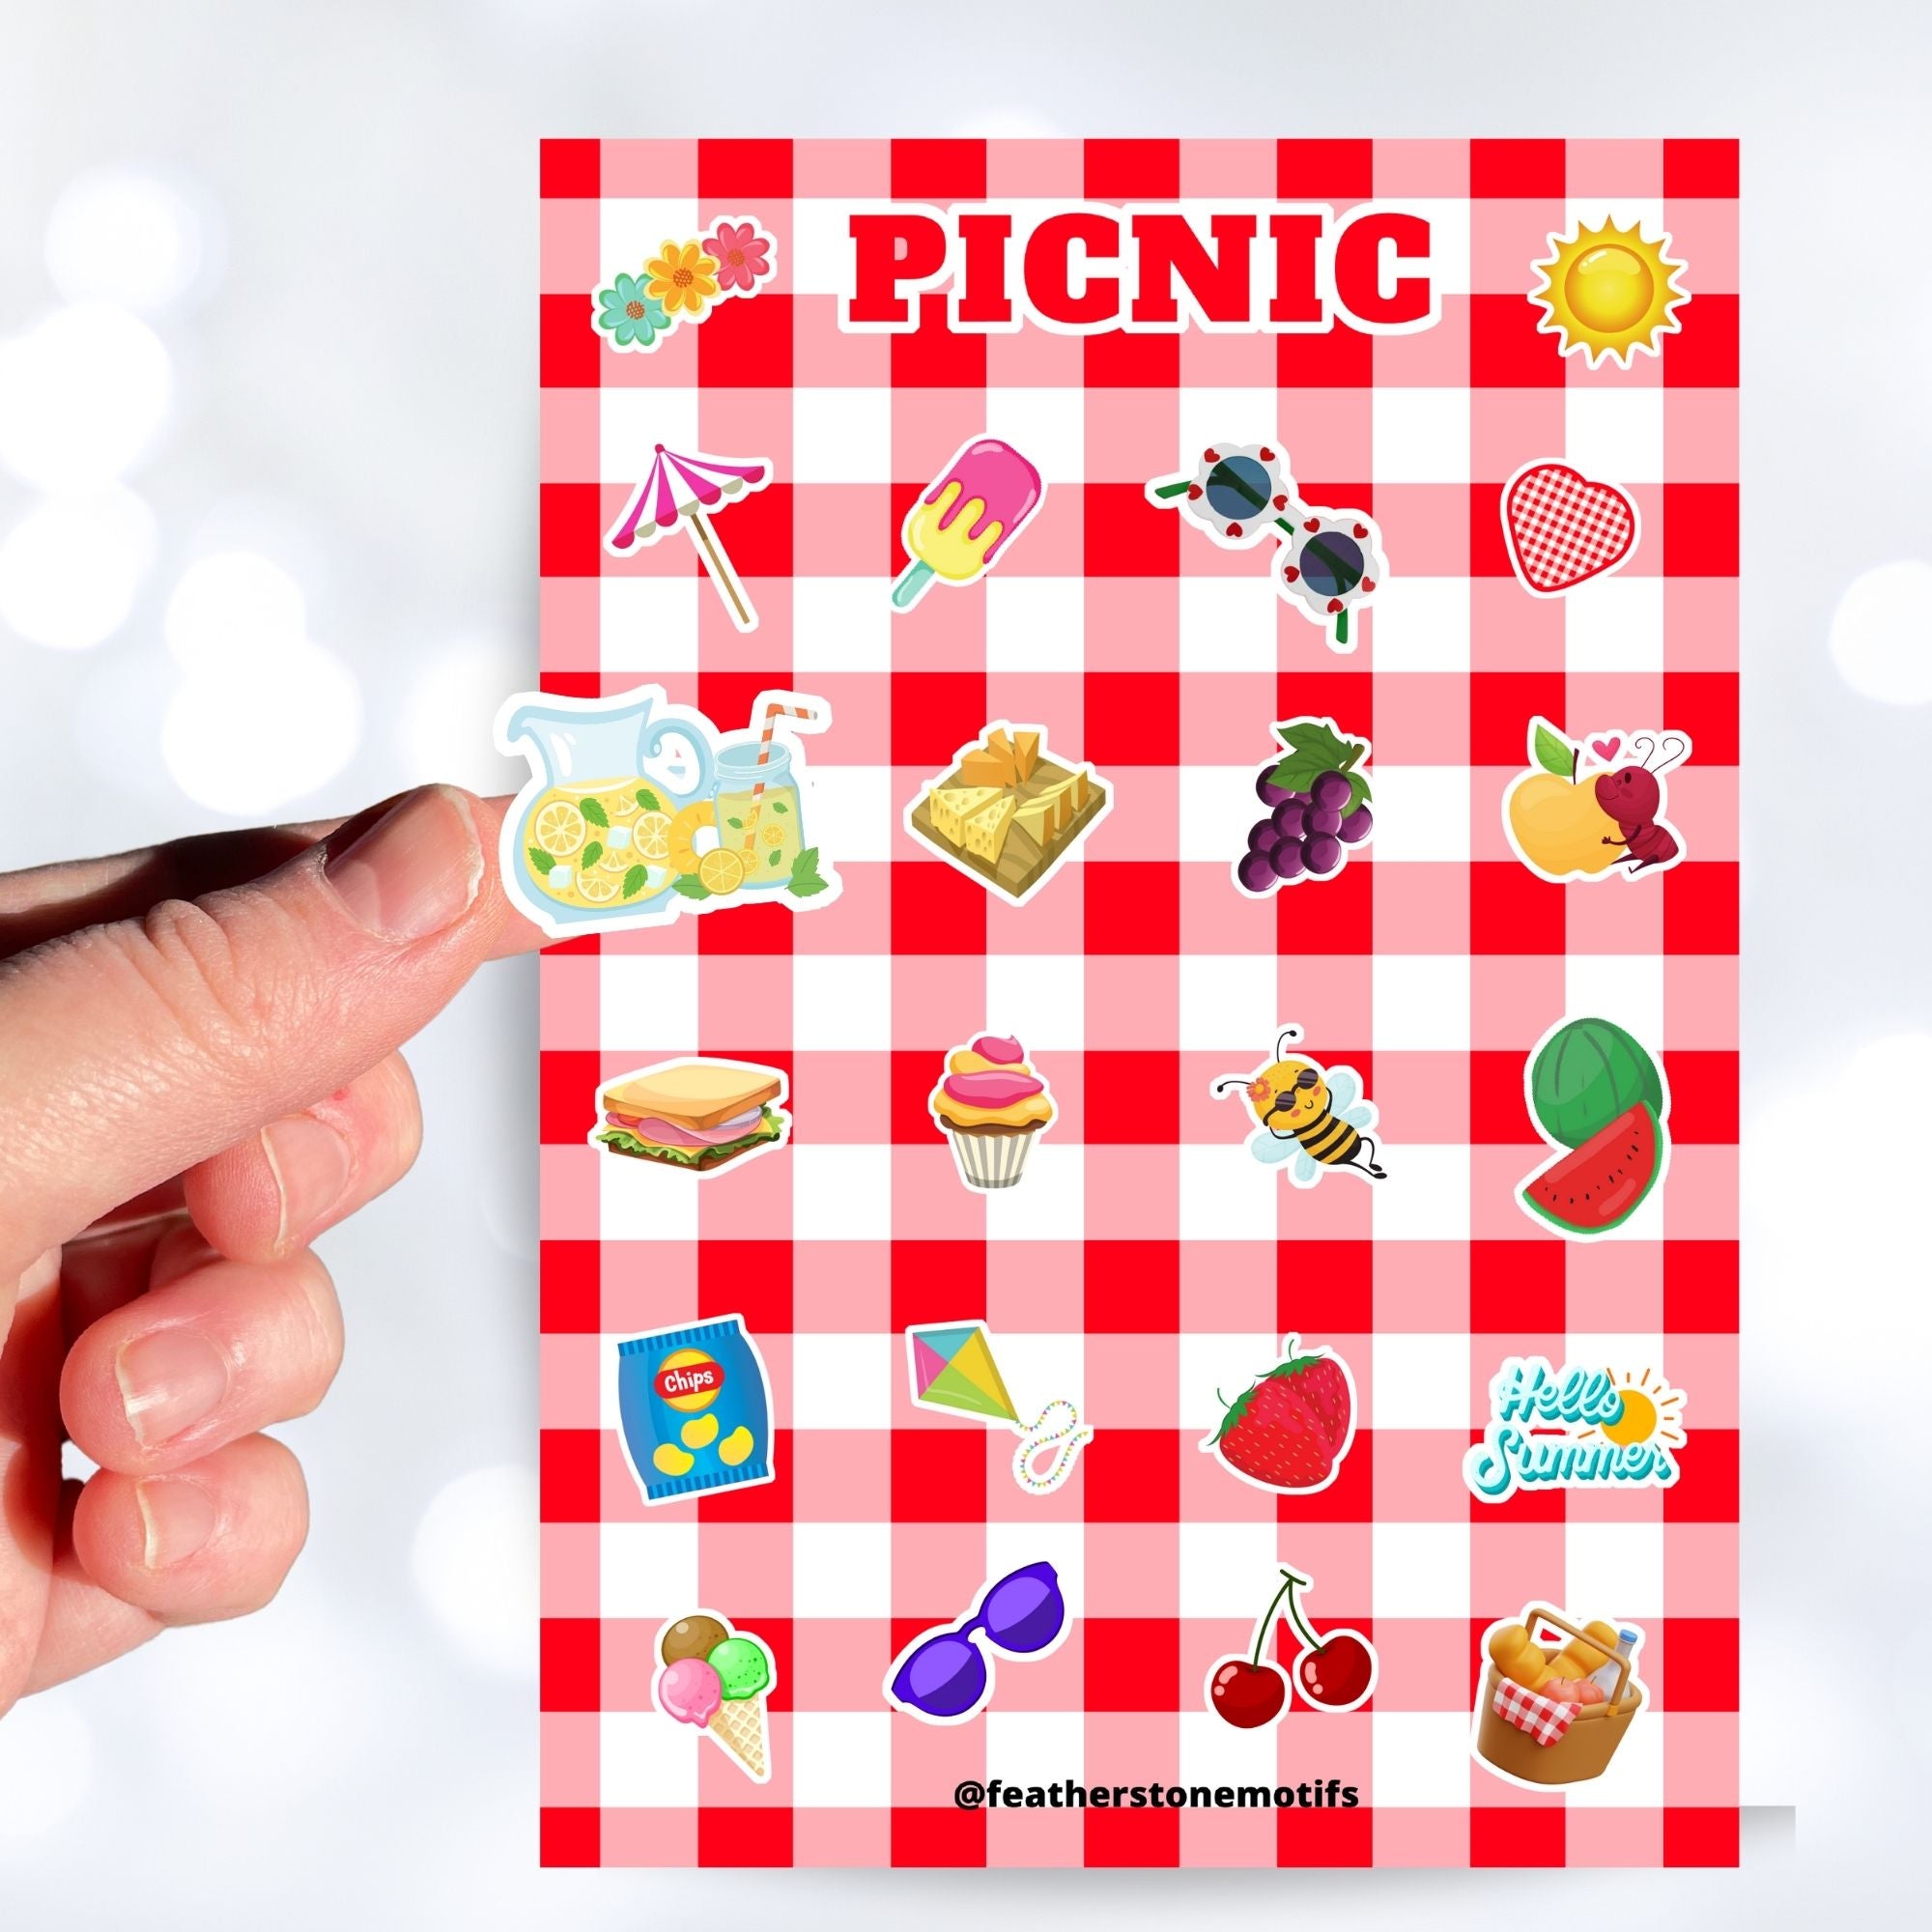 Pack the picnic basket and grab a blanket; we're going on a picnic! This sticker sheet has sticker images of all your favorite picnic foods and activities like sandwiches, fruit, ice cream, and lemonade all on a red and white checked tablecloth background. This image shows a hand holding a sticker of lemonade in a pitcher and glass above the sticker sheet.